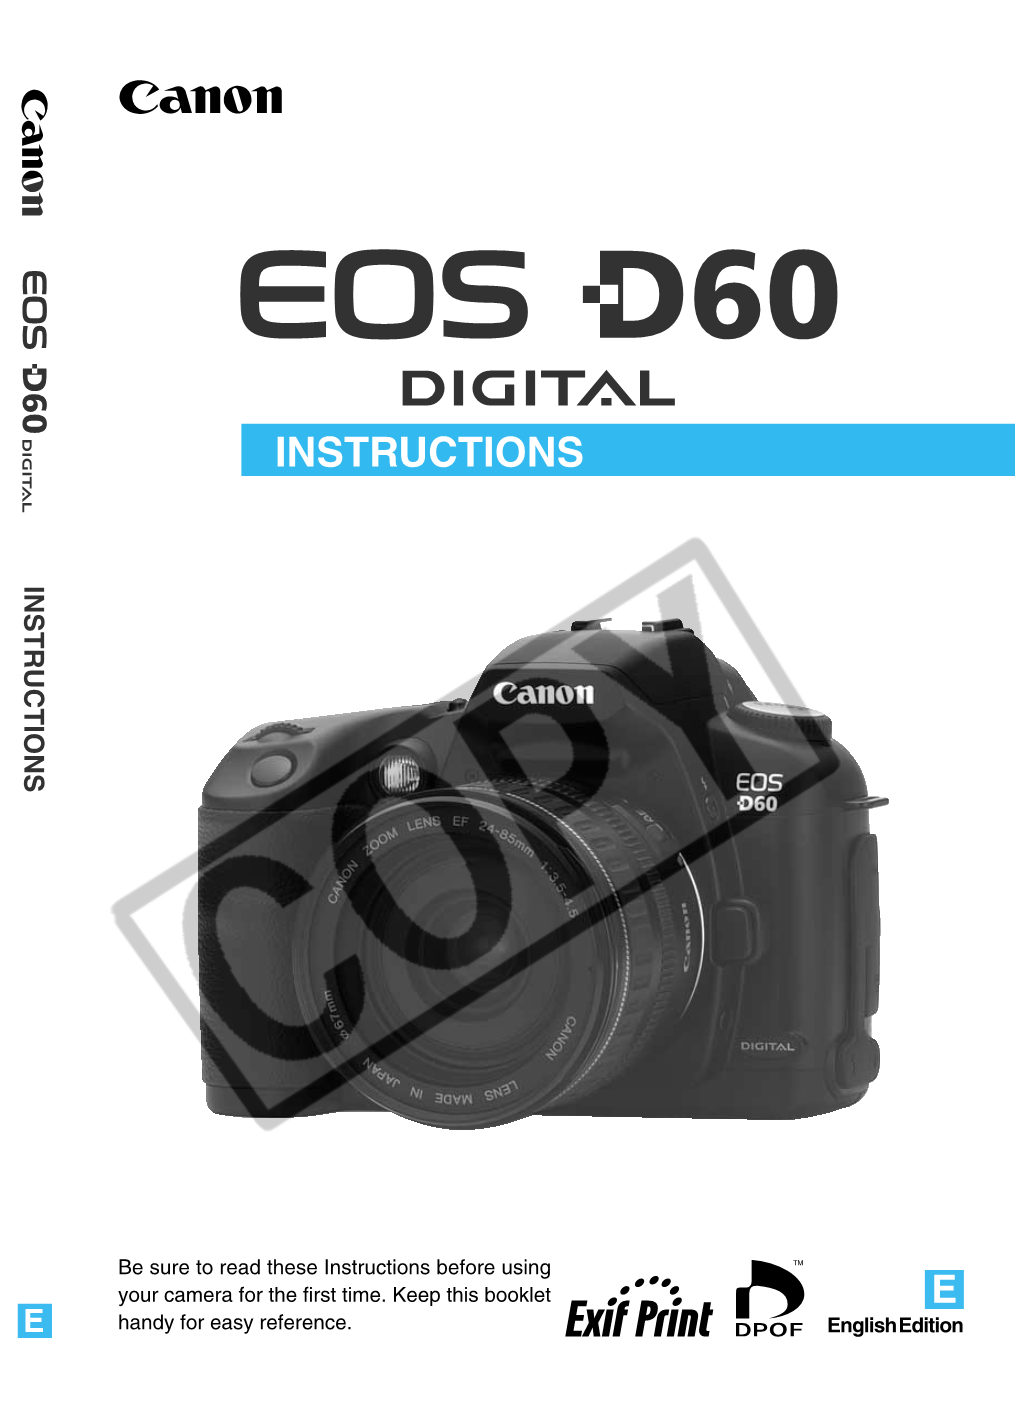 Canon EOS D60 Camera Conform to the Print Order Format (DPOF) Standard